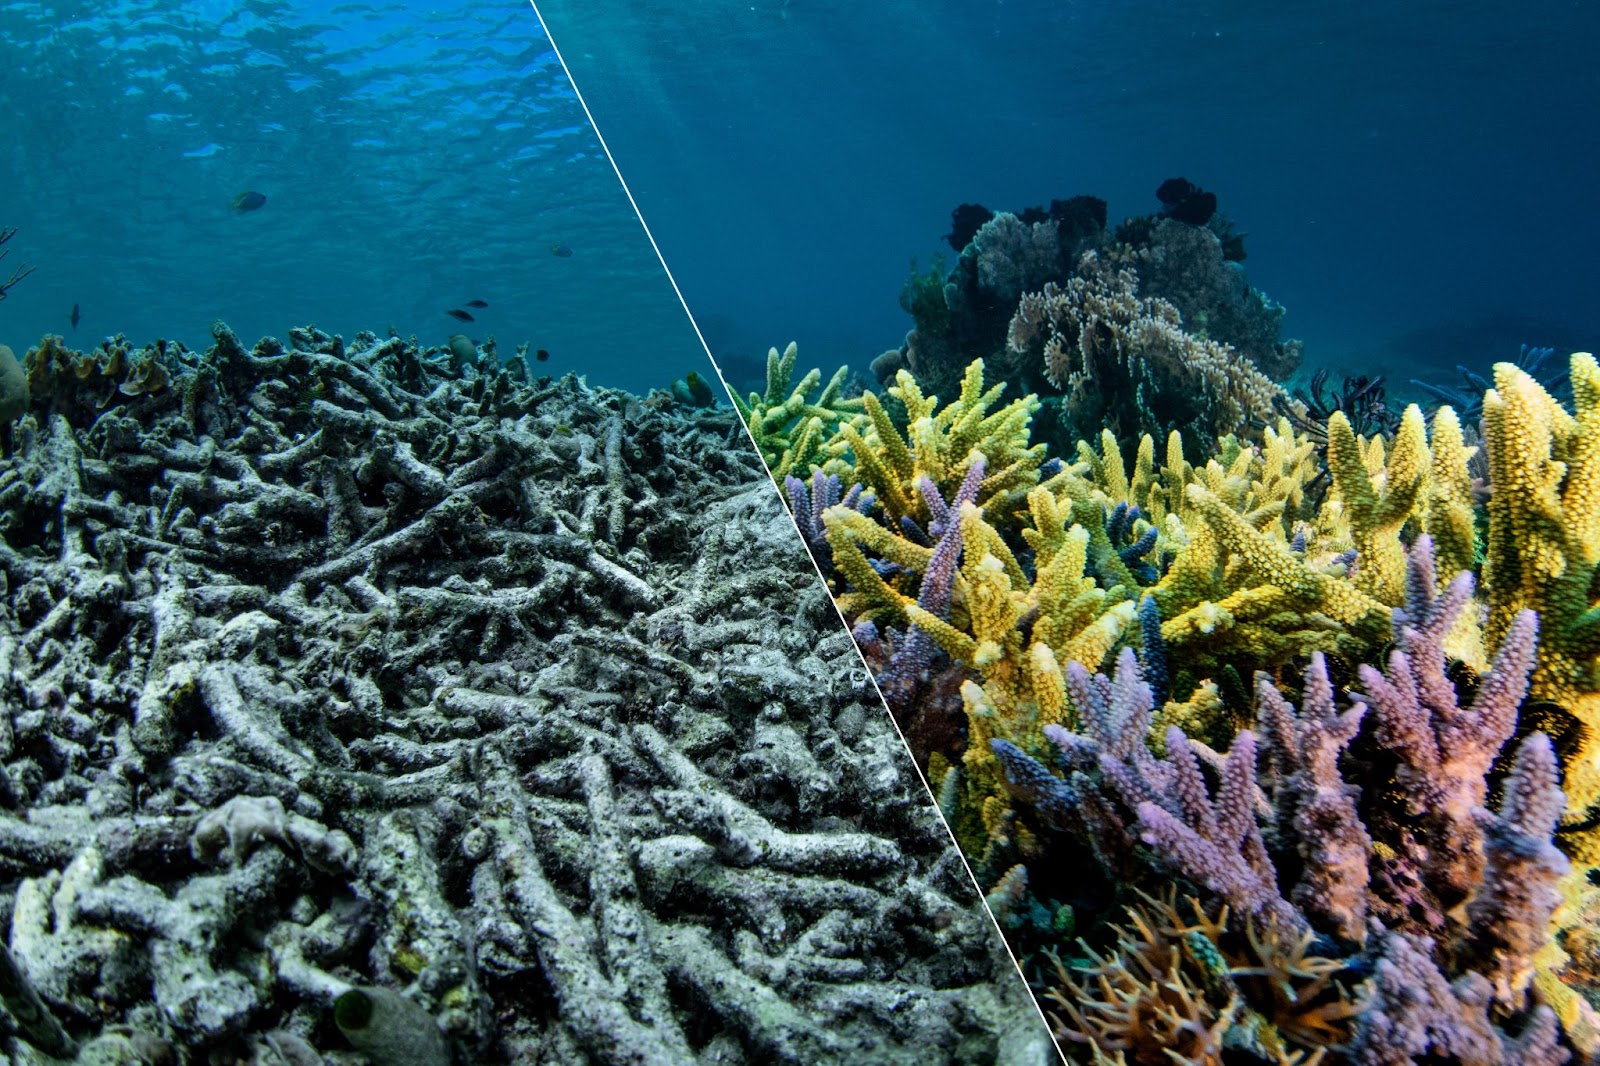 A picture of coral, divided in half: on the left the grey, colorless coral is collapsed as the sea ripples above it. On the right we see coral standing upright, vibrant in yellows and purples and pinks. A contrast between dying coral and healthy coral.